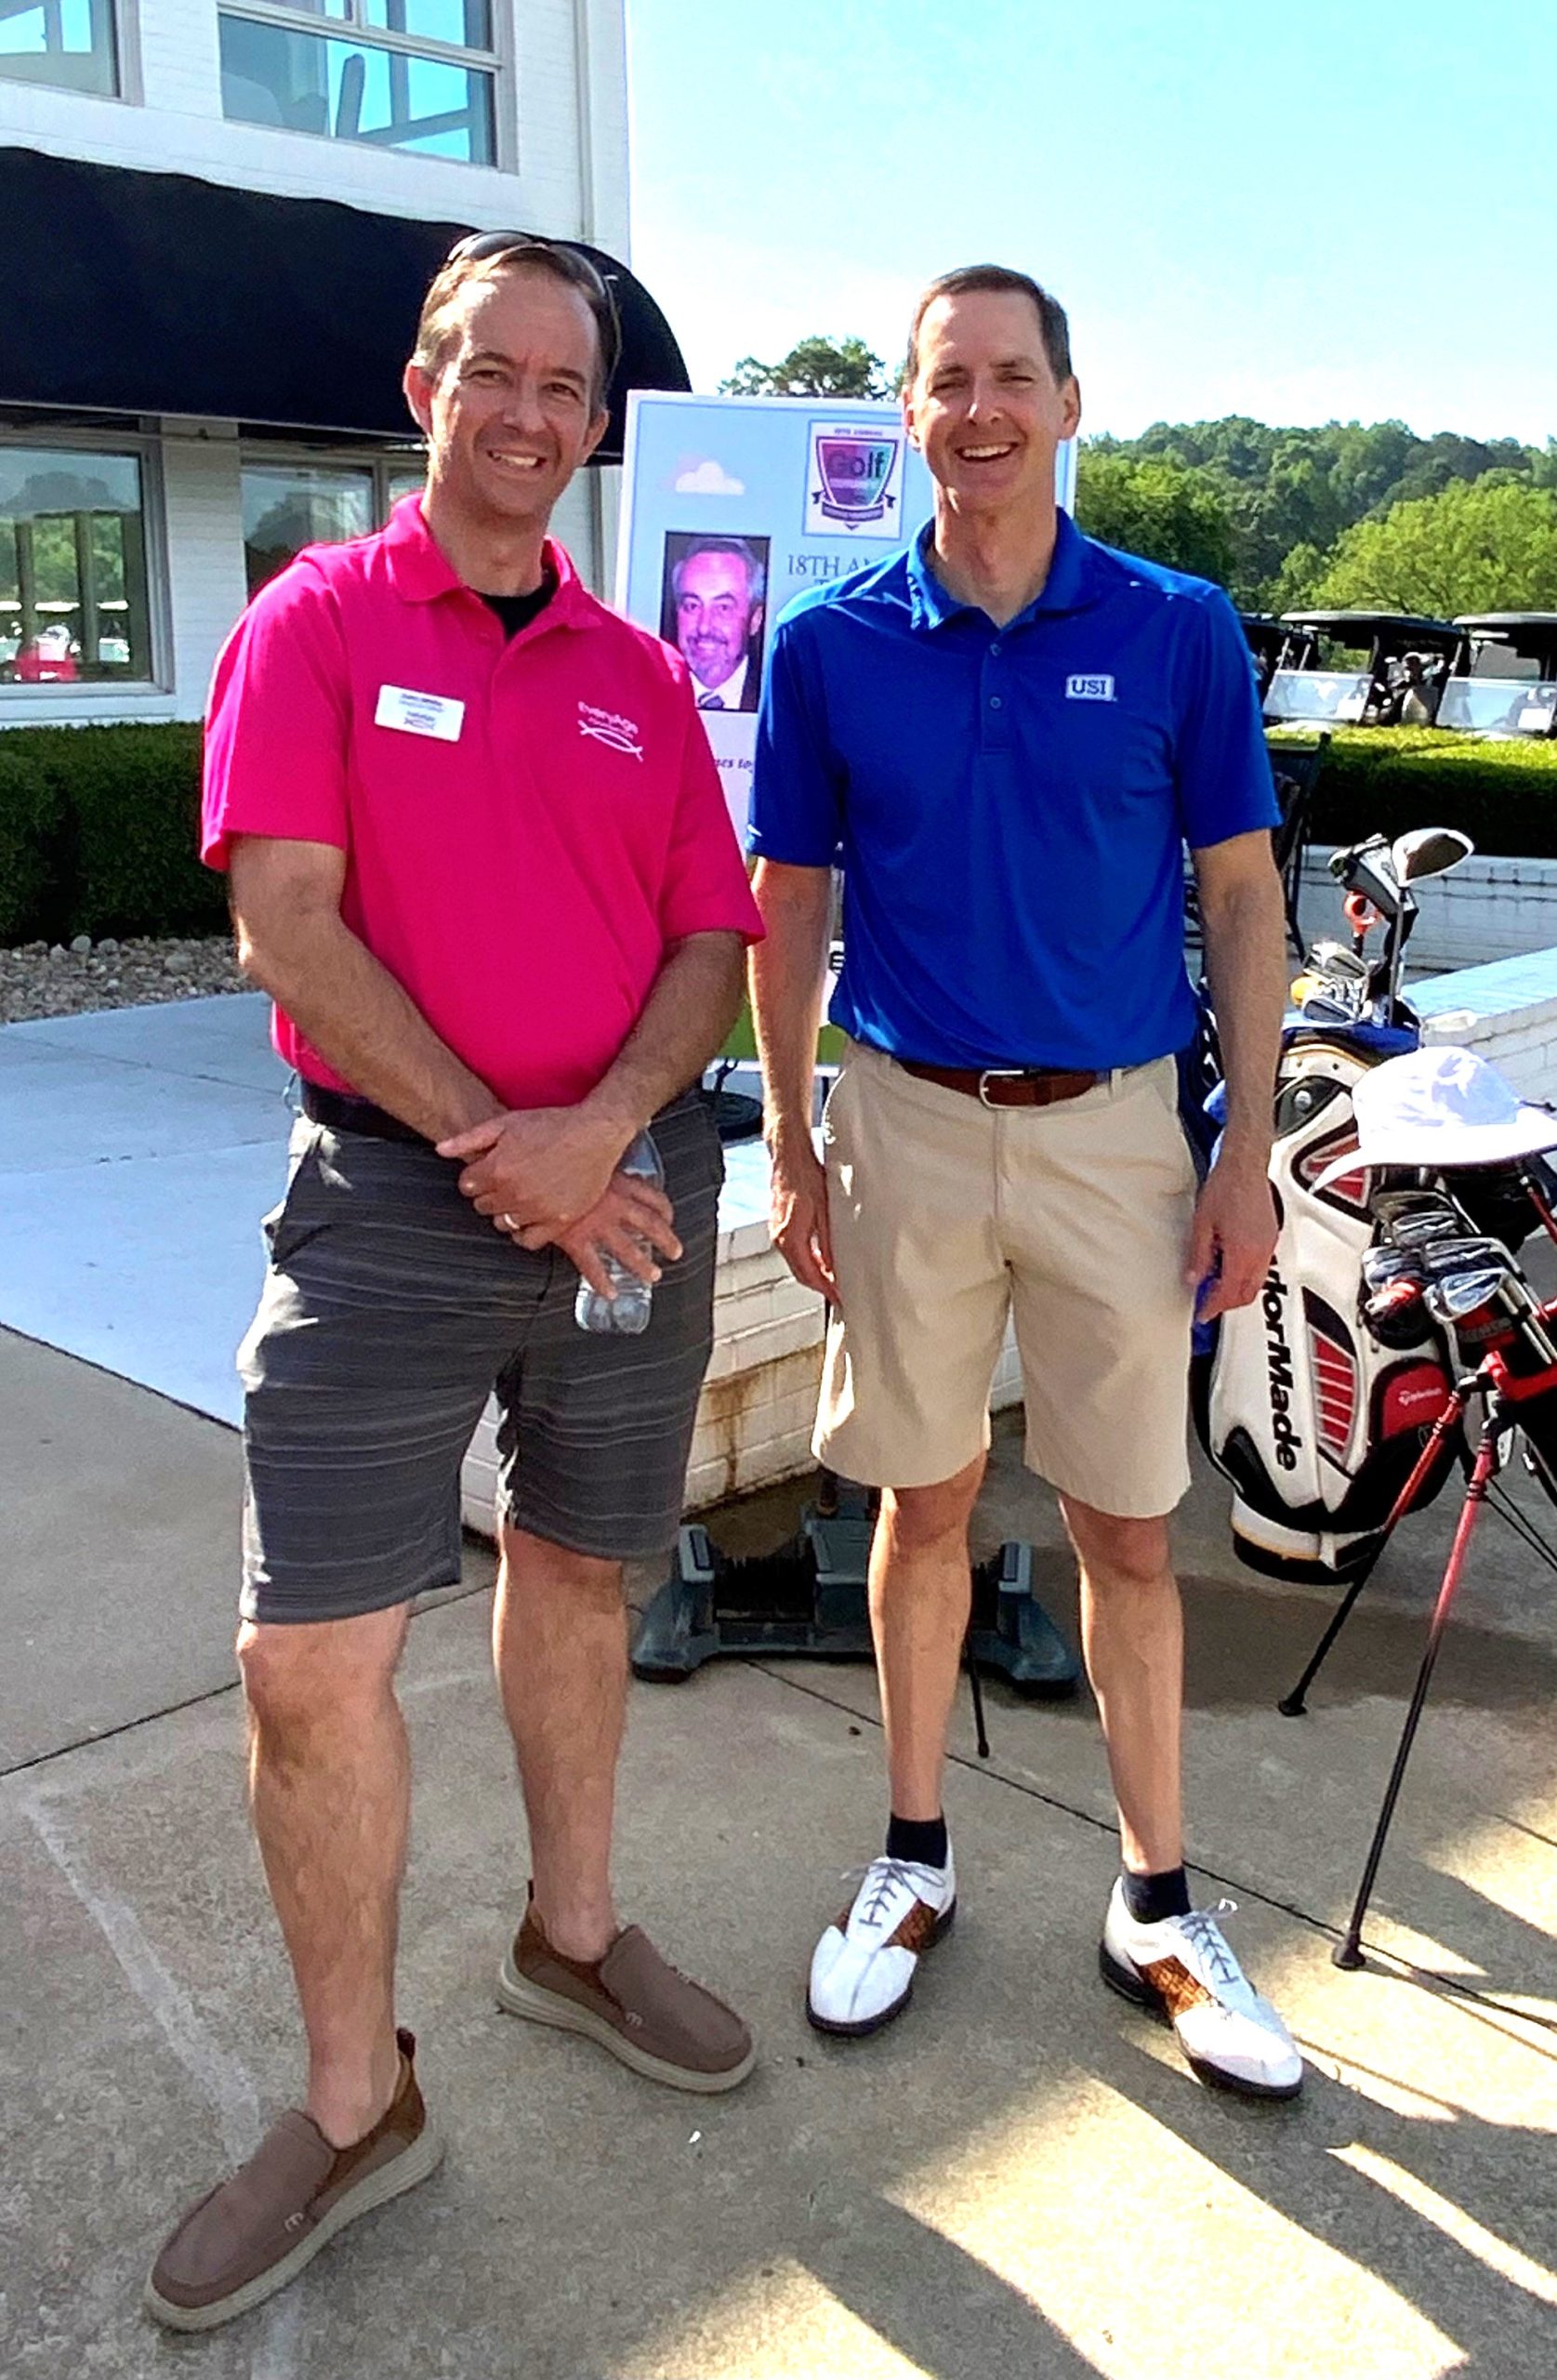 Two men standing at golf tournament, wearing polo shirts and shorts